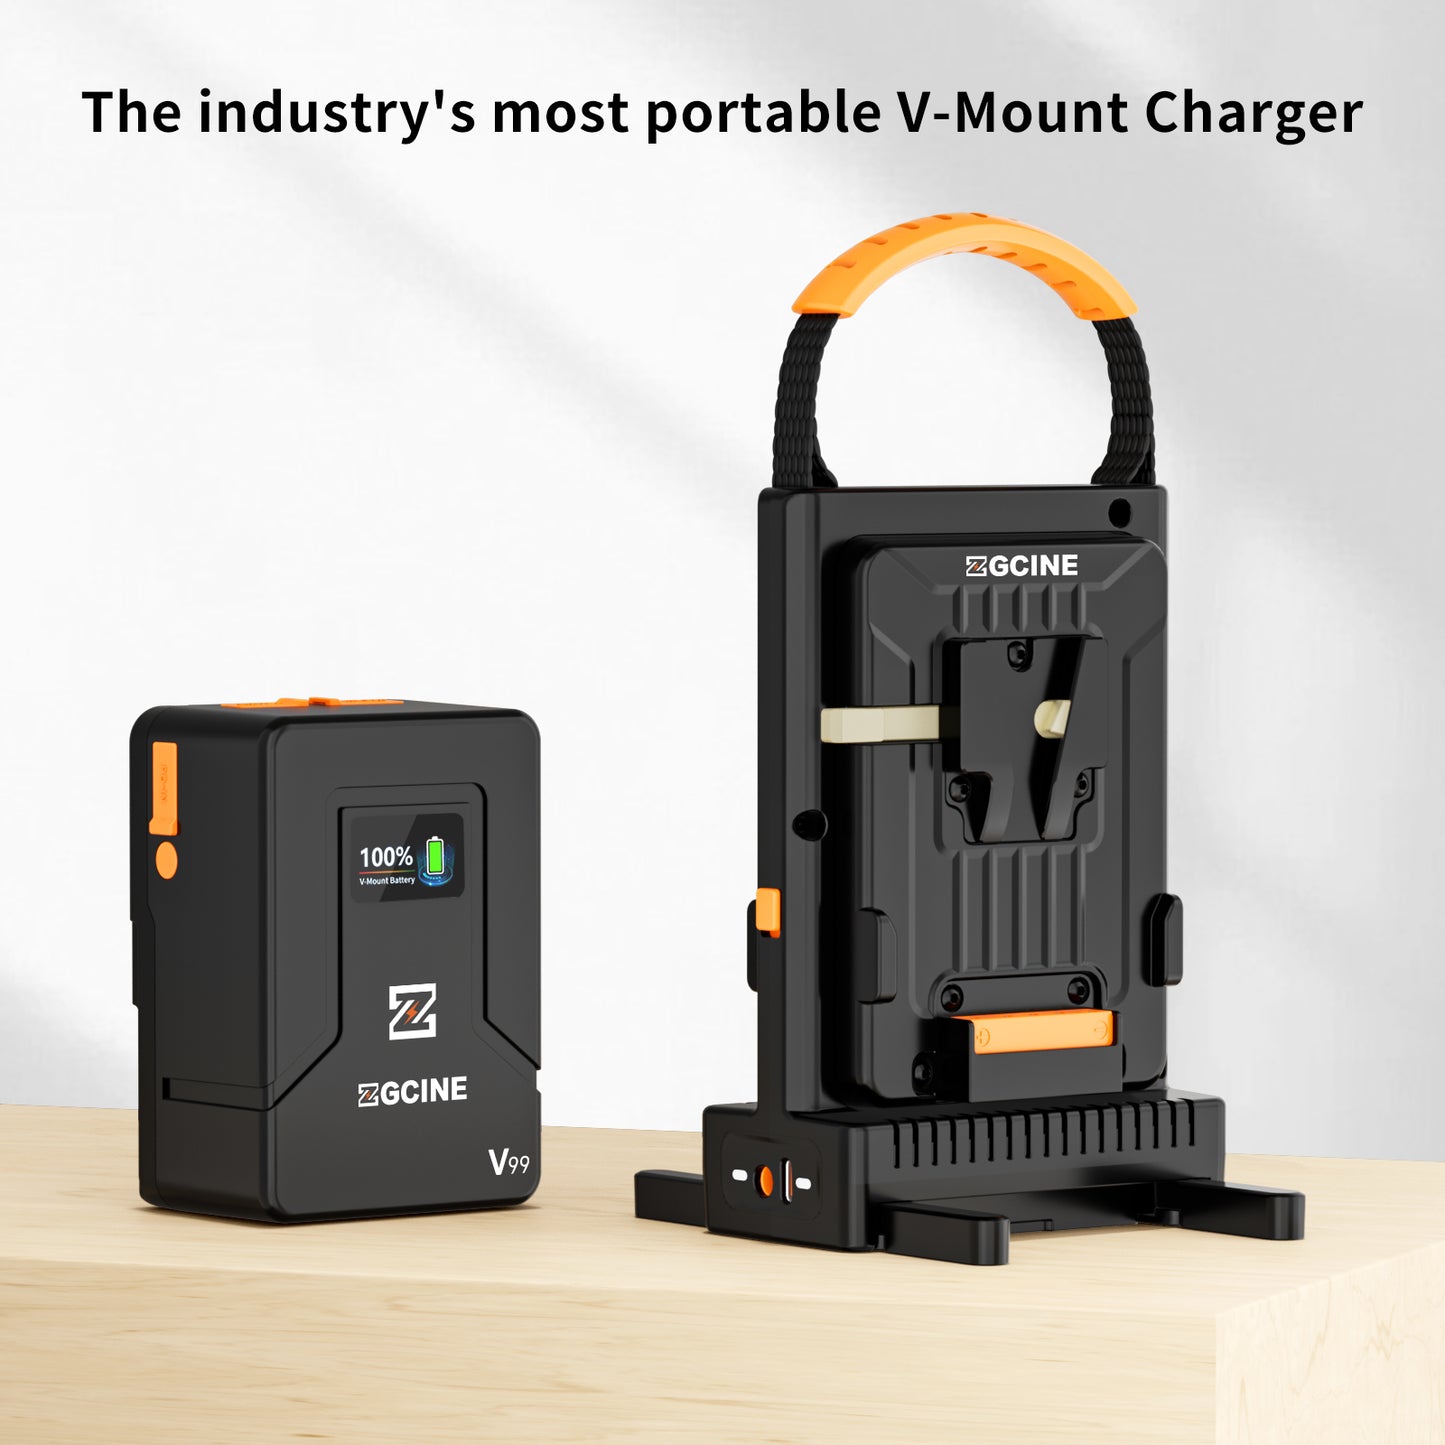 ZGCINE VM-C2 Dual Charger Kit for V-Mount Battery Charger, Support hot Switching Output